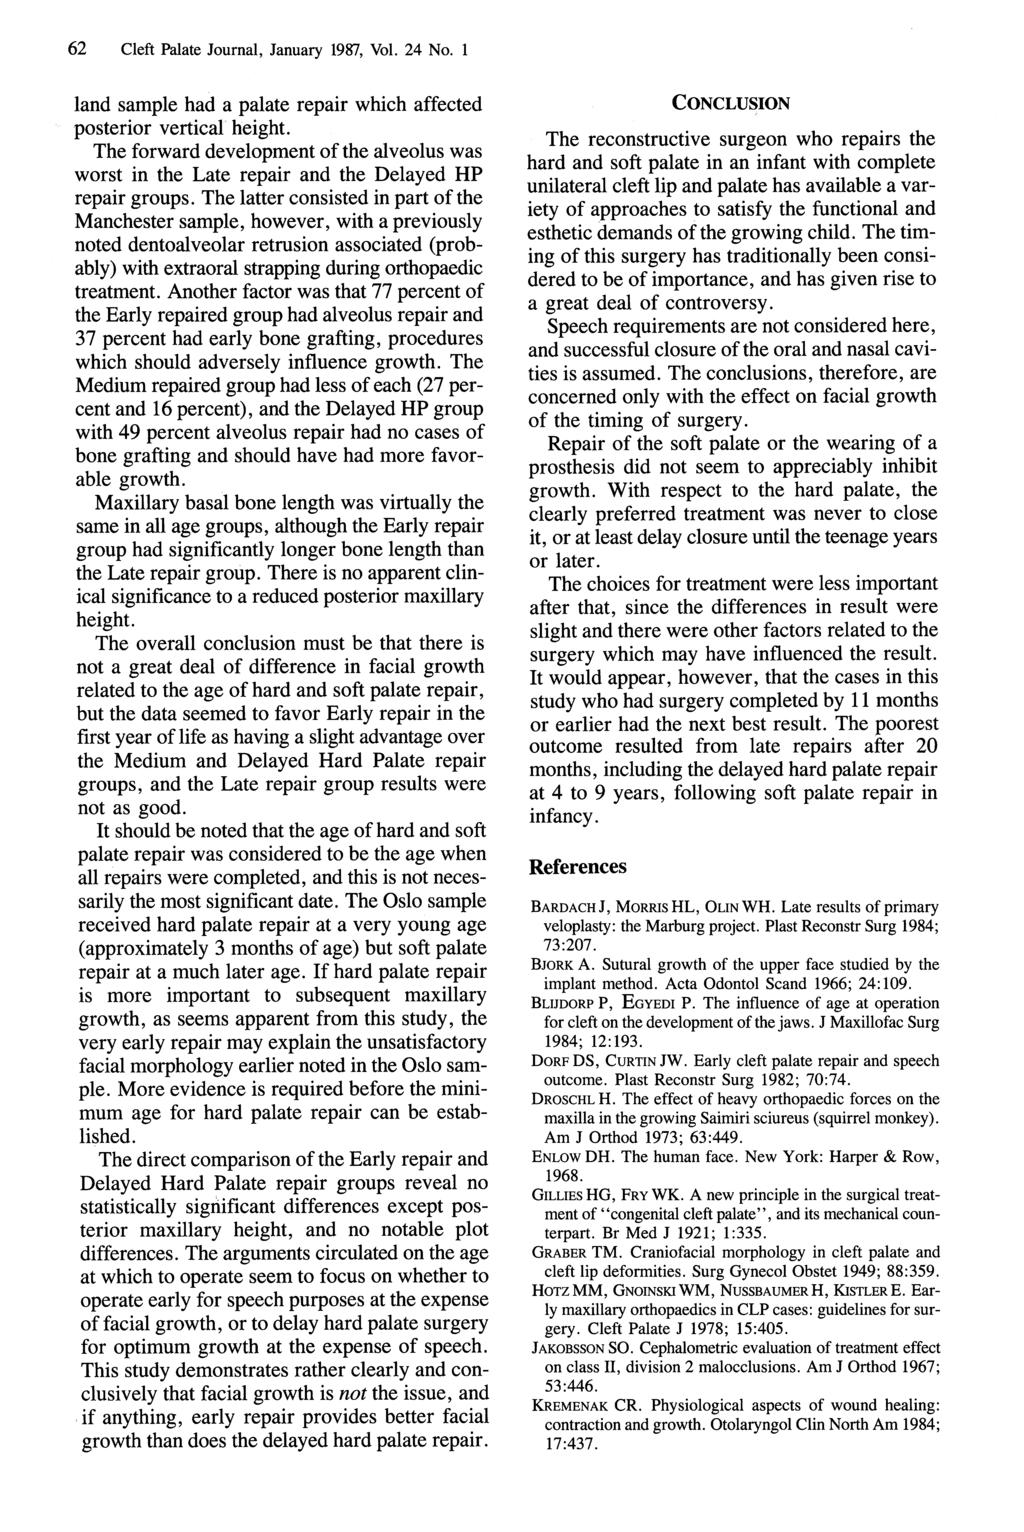 62 Cleft Palate Journal, January 1987, Vol. 24 No. 1 land sample had a palate repair which affected - posterior vertical height.